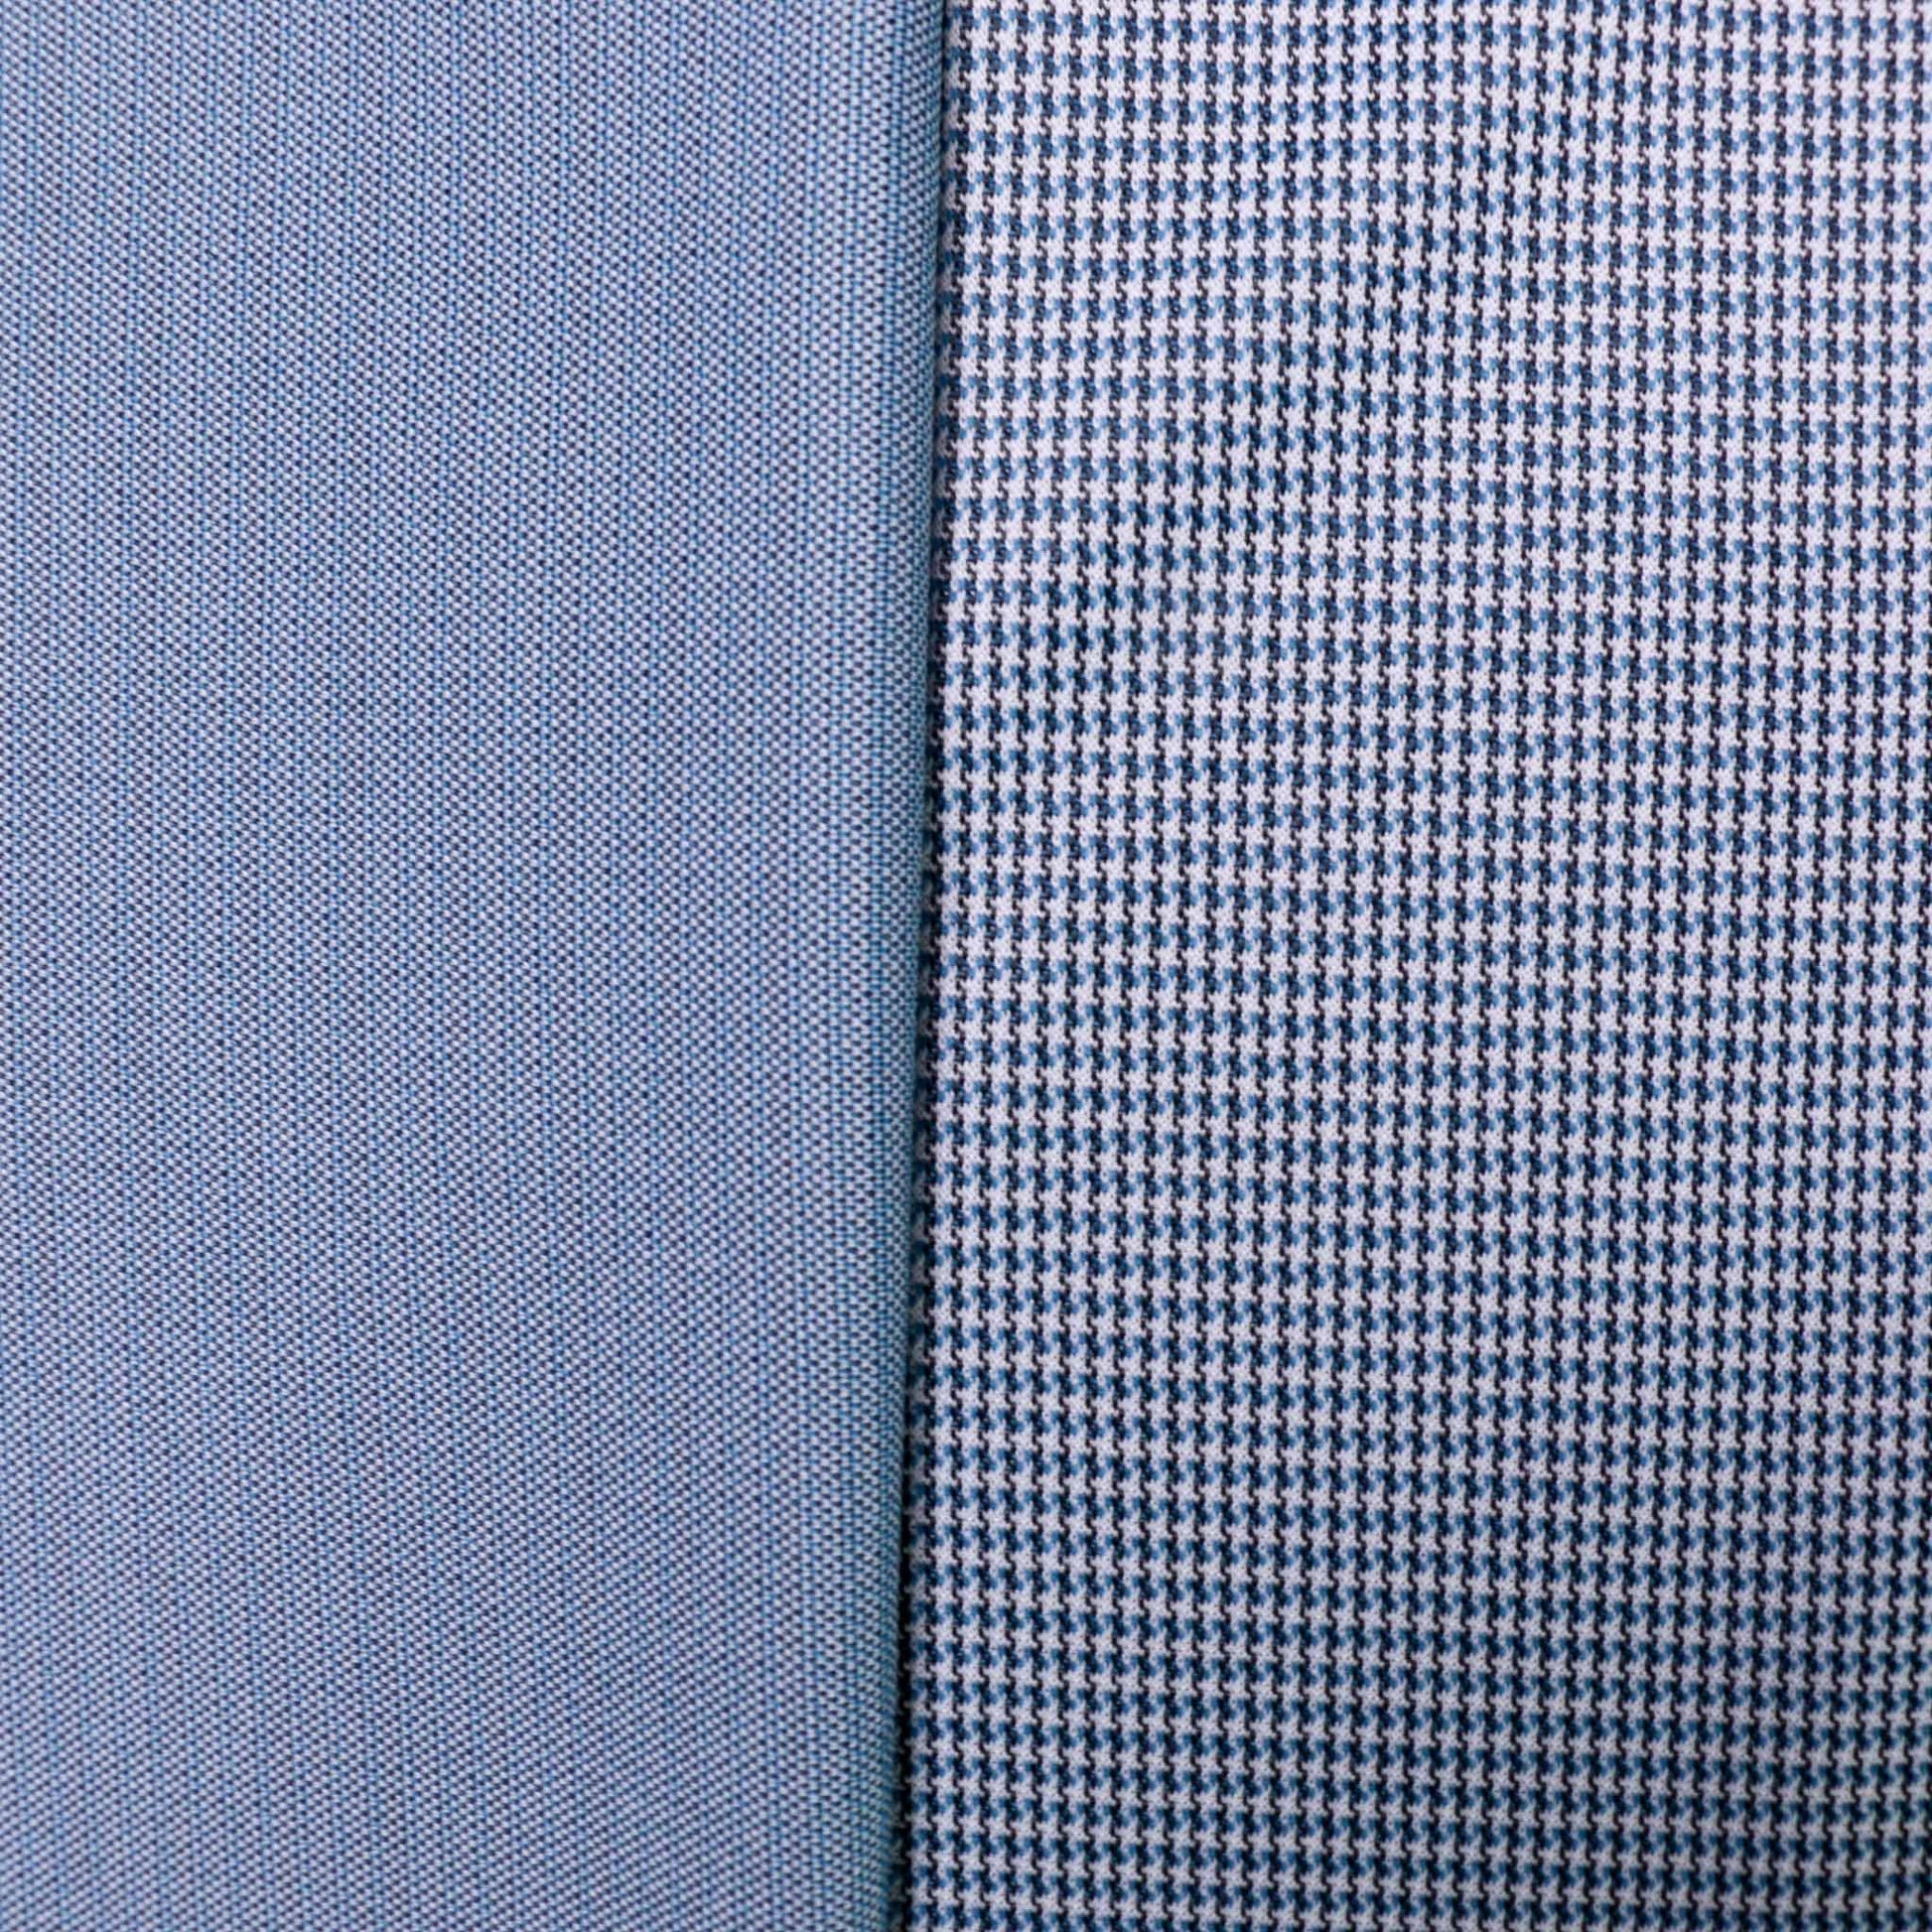 blue and white vintage jersey crimplene sustainable dressmaking fabric with houndstooth pattern